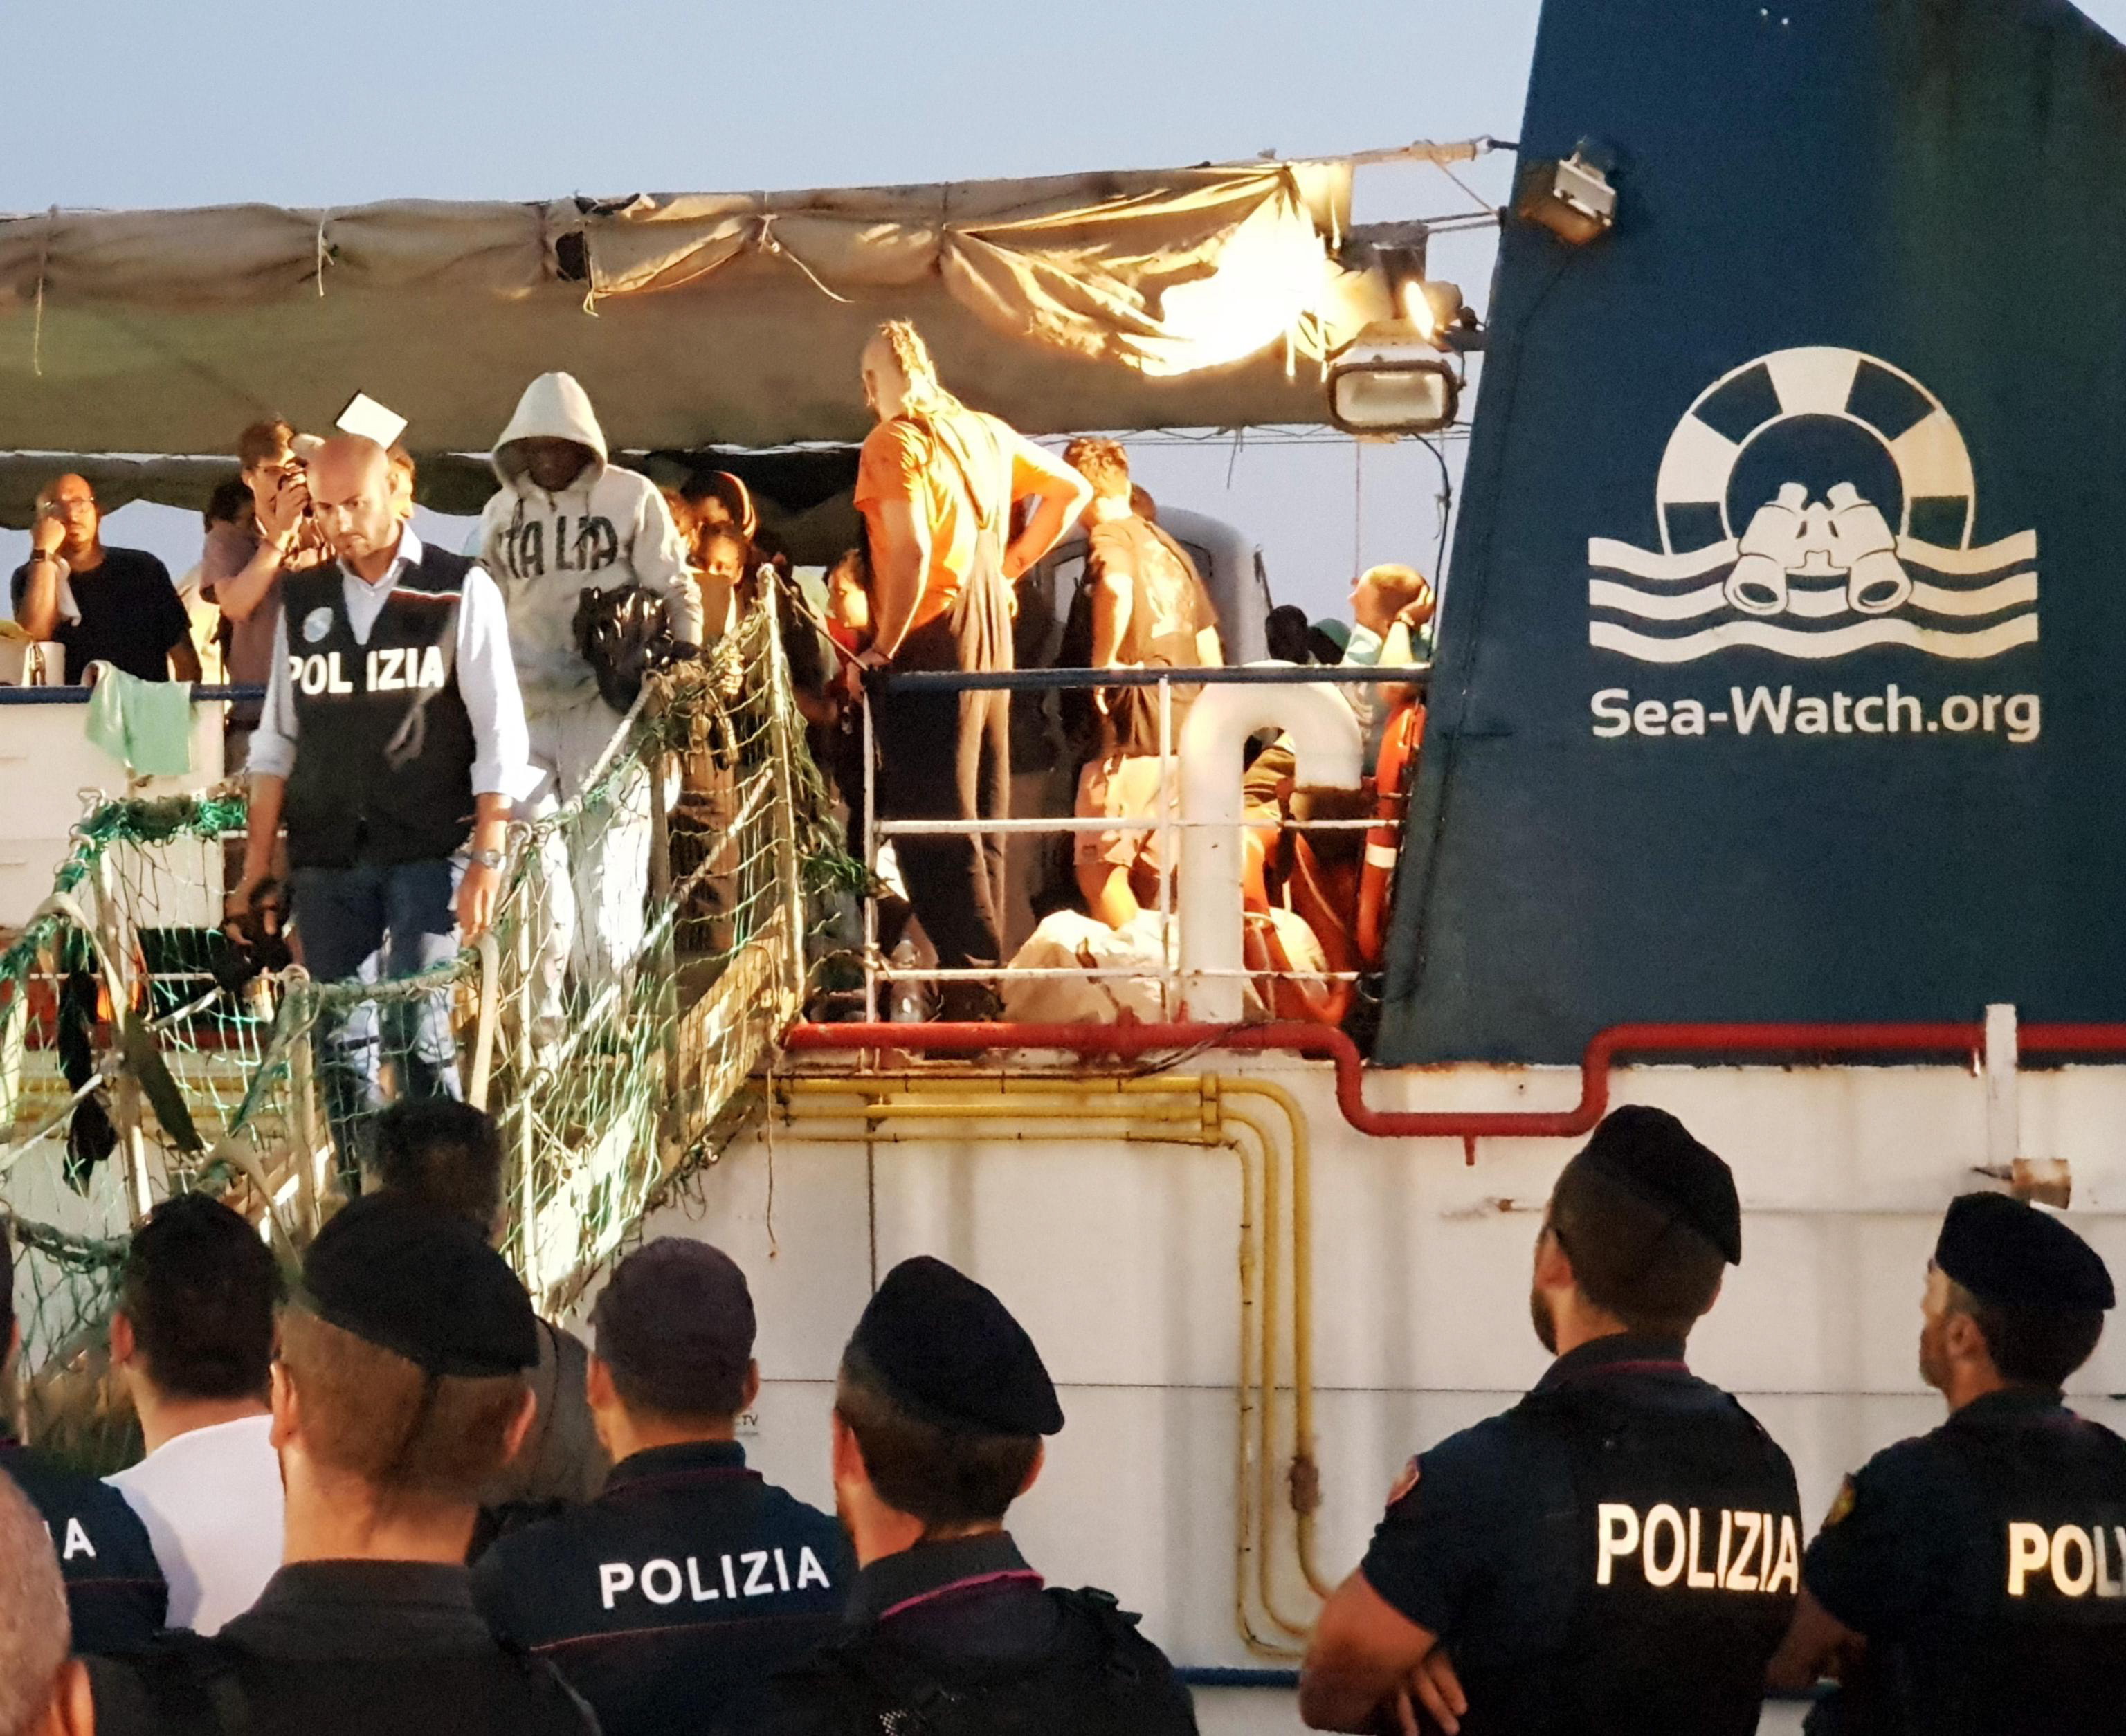 epa07681979 Some of the 40 migrants who were on board the Sea Watch rescue ship disembark at the port of Lampedusa, Italy, 29 June 2019.  According to reports, the captain of the Sea Watch, Carola Rackete, was arrested after entering the port of Lampedusa and ramming a patrol boat.  EPA/ELIO DESIDERIO